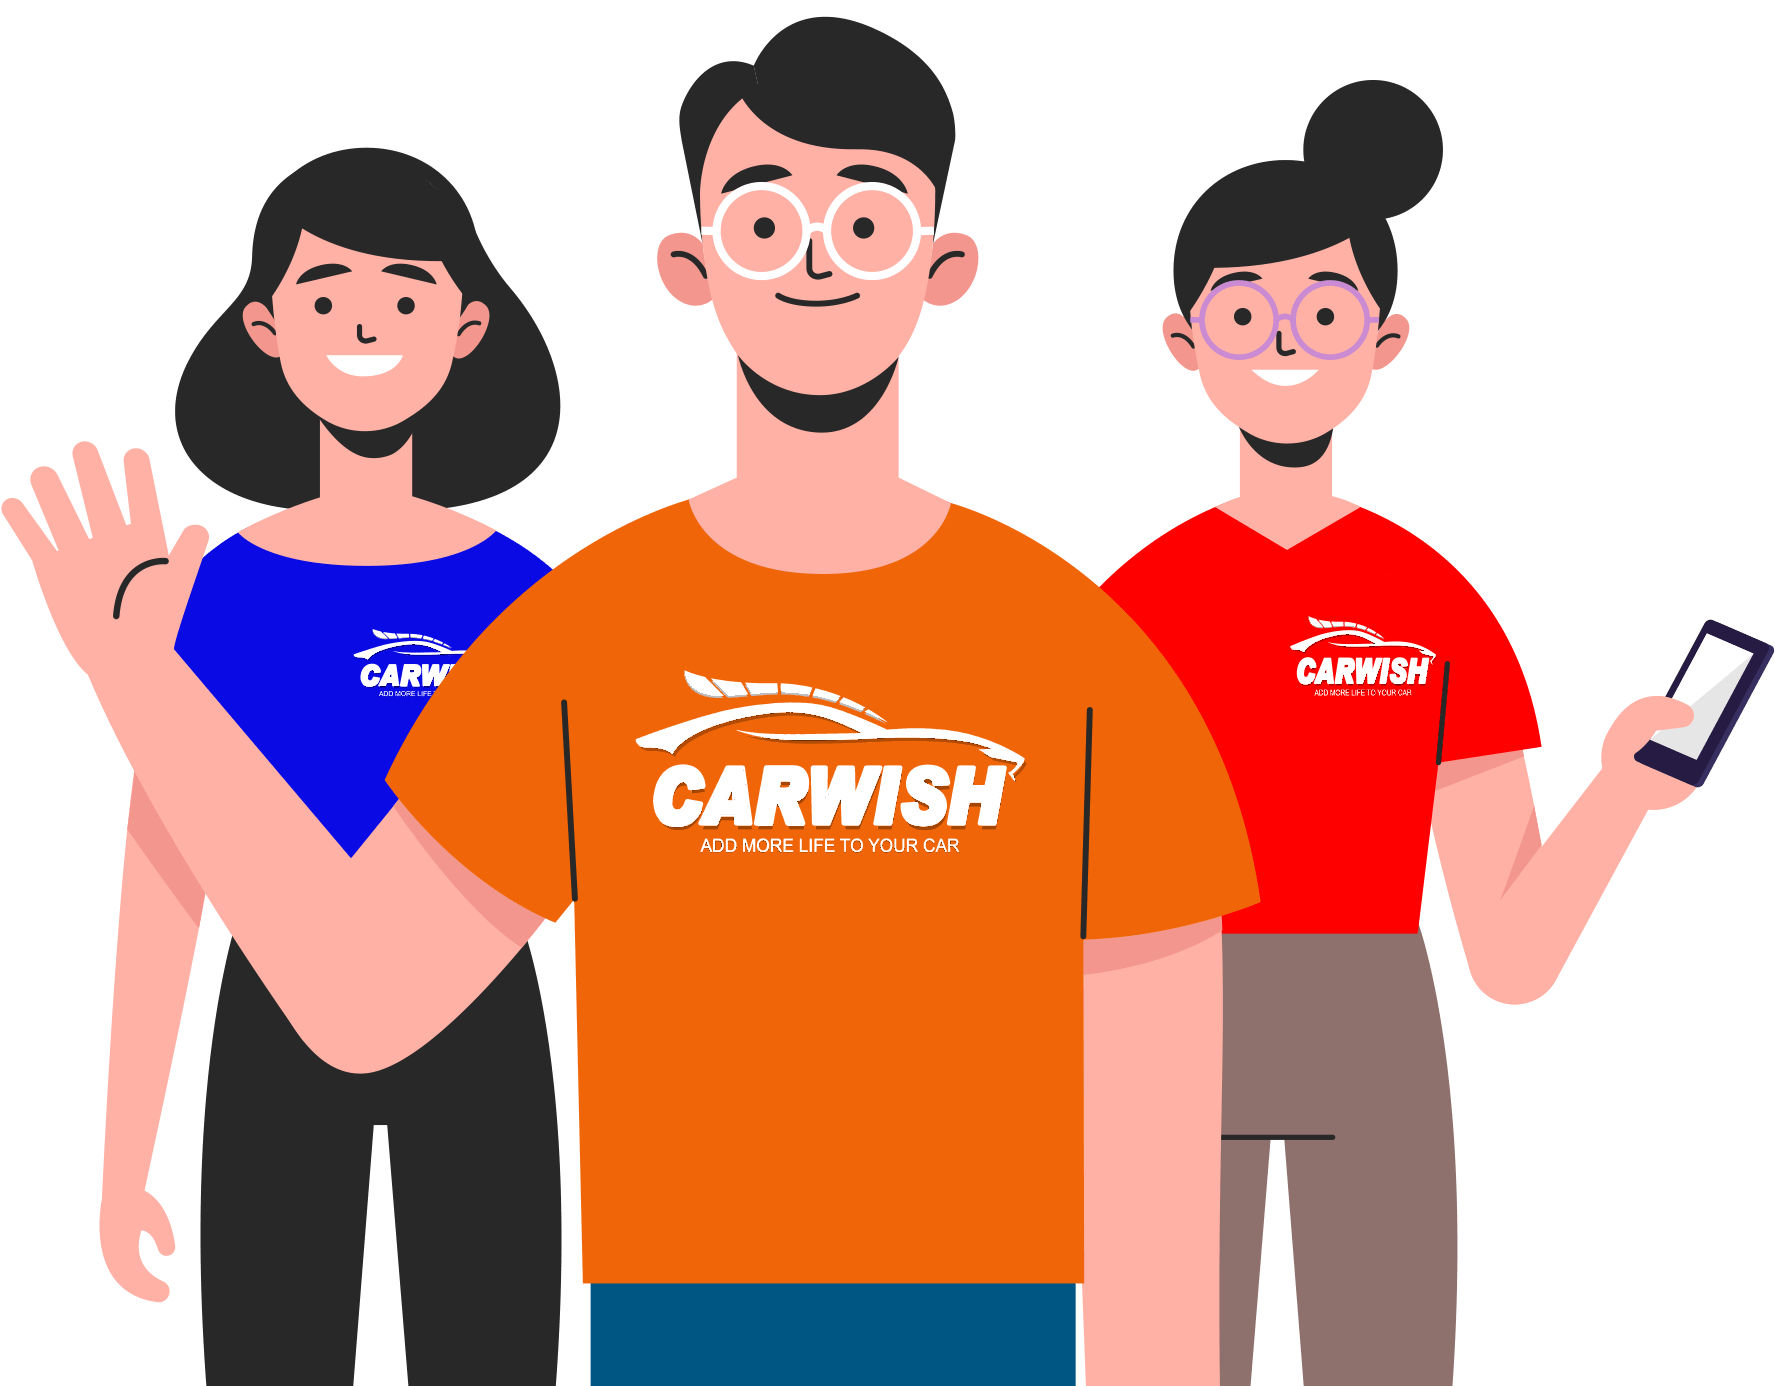 about carwish